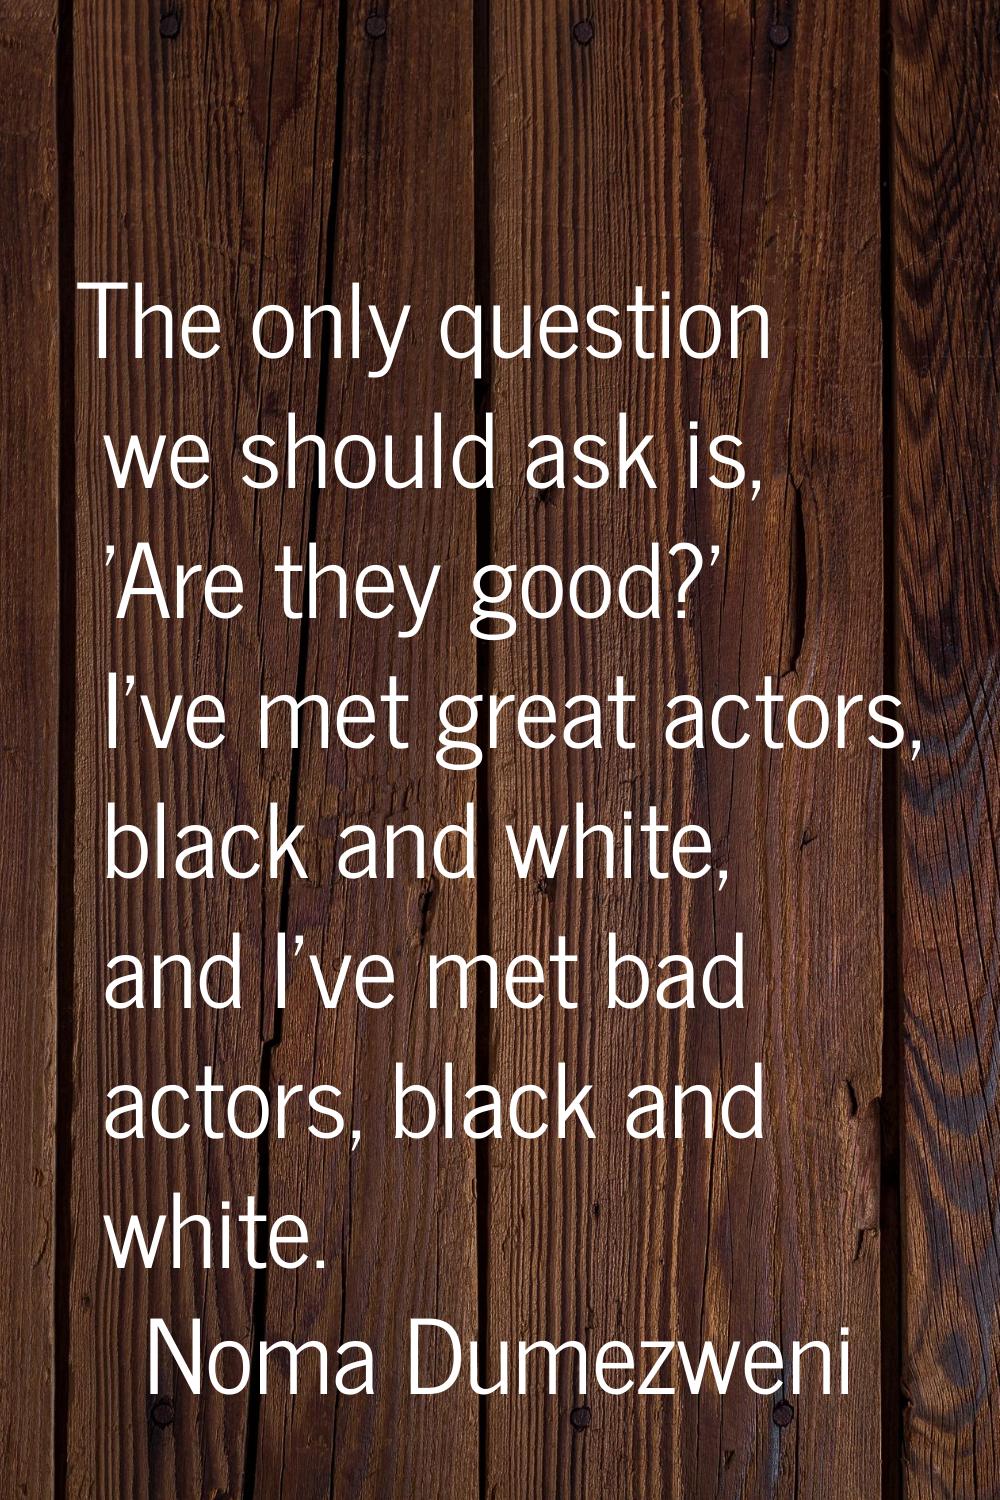 The only question we should ask is, 'Are they good?' I've met great actors, black and white, and I'